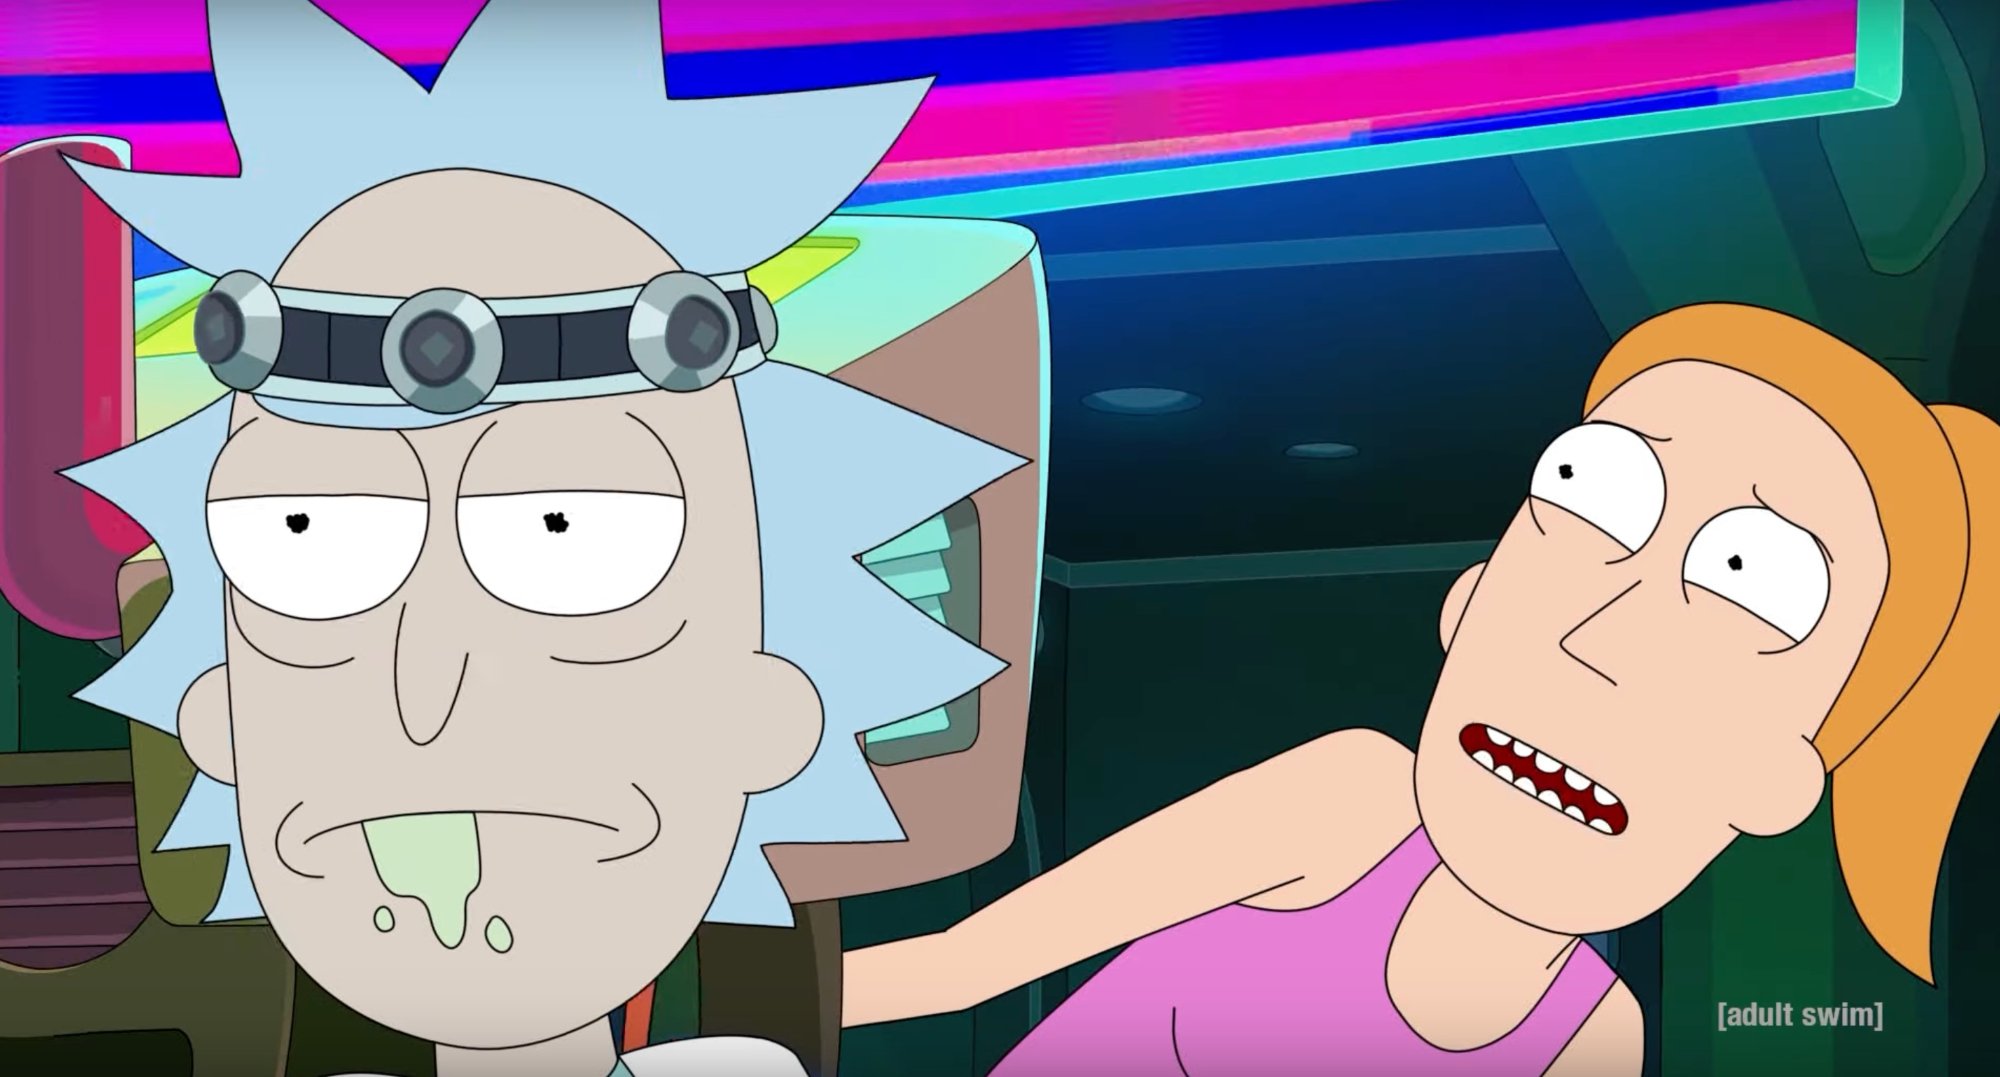 Rick makes 'Die Hard' reference to Summer in 'Rick and Morty' Season 6 trailer